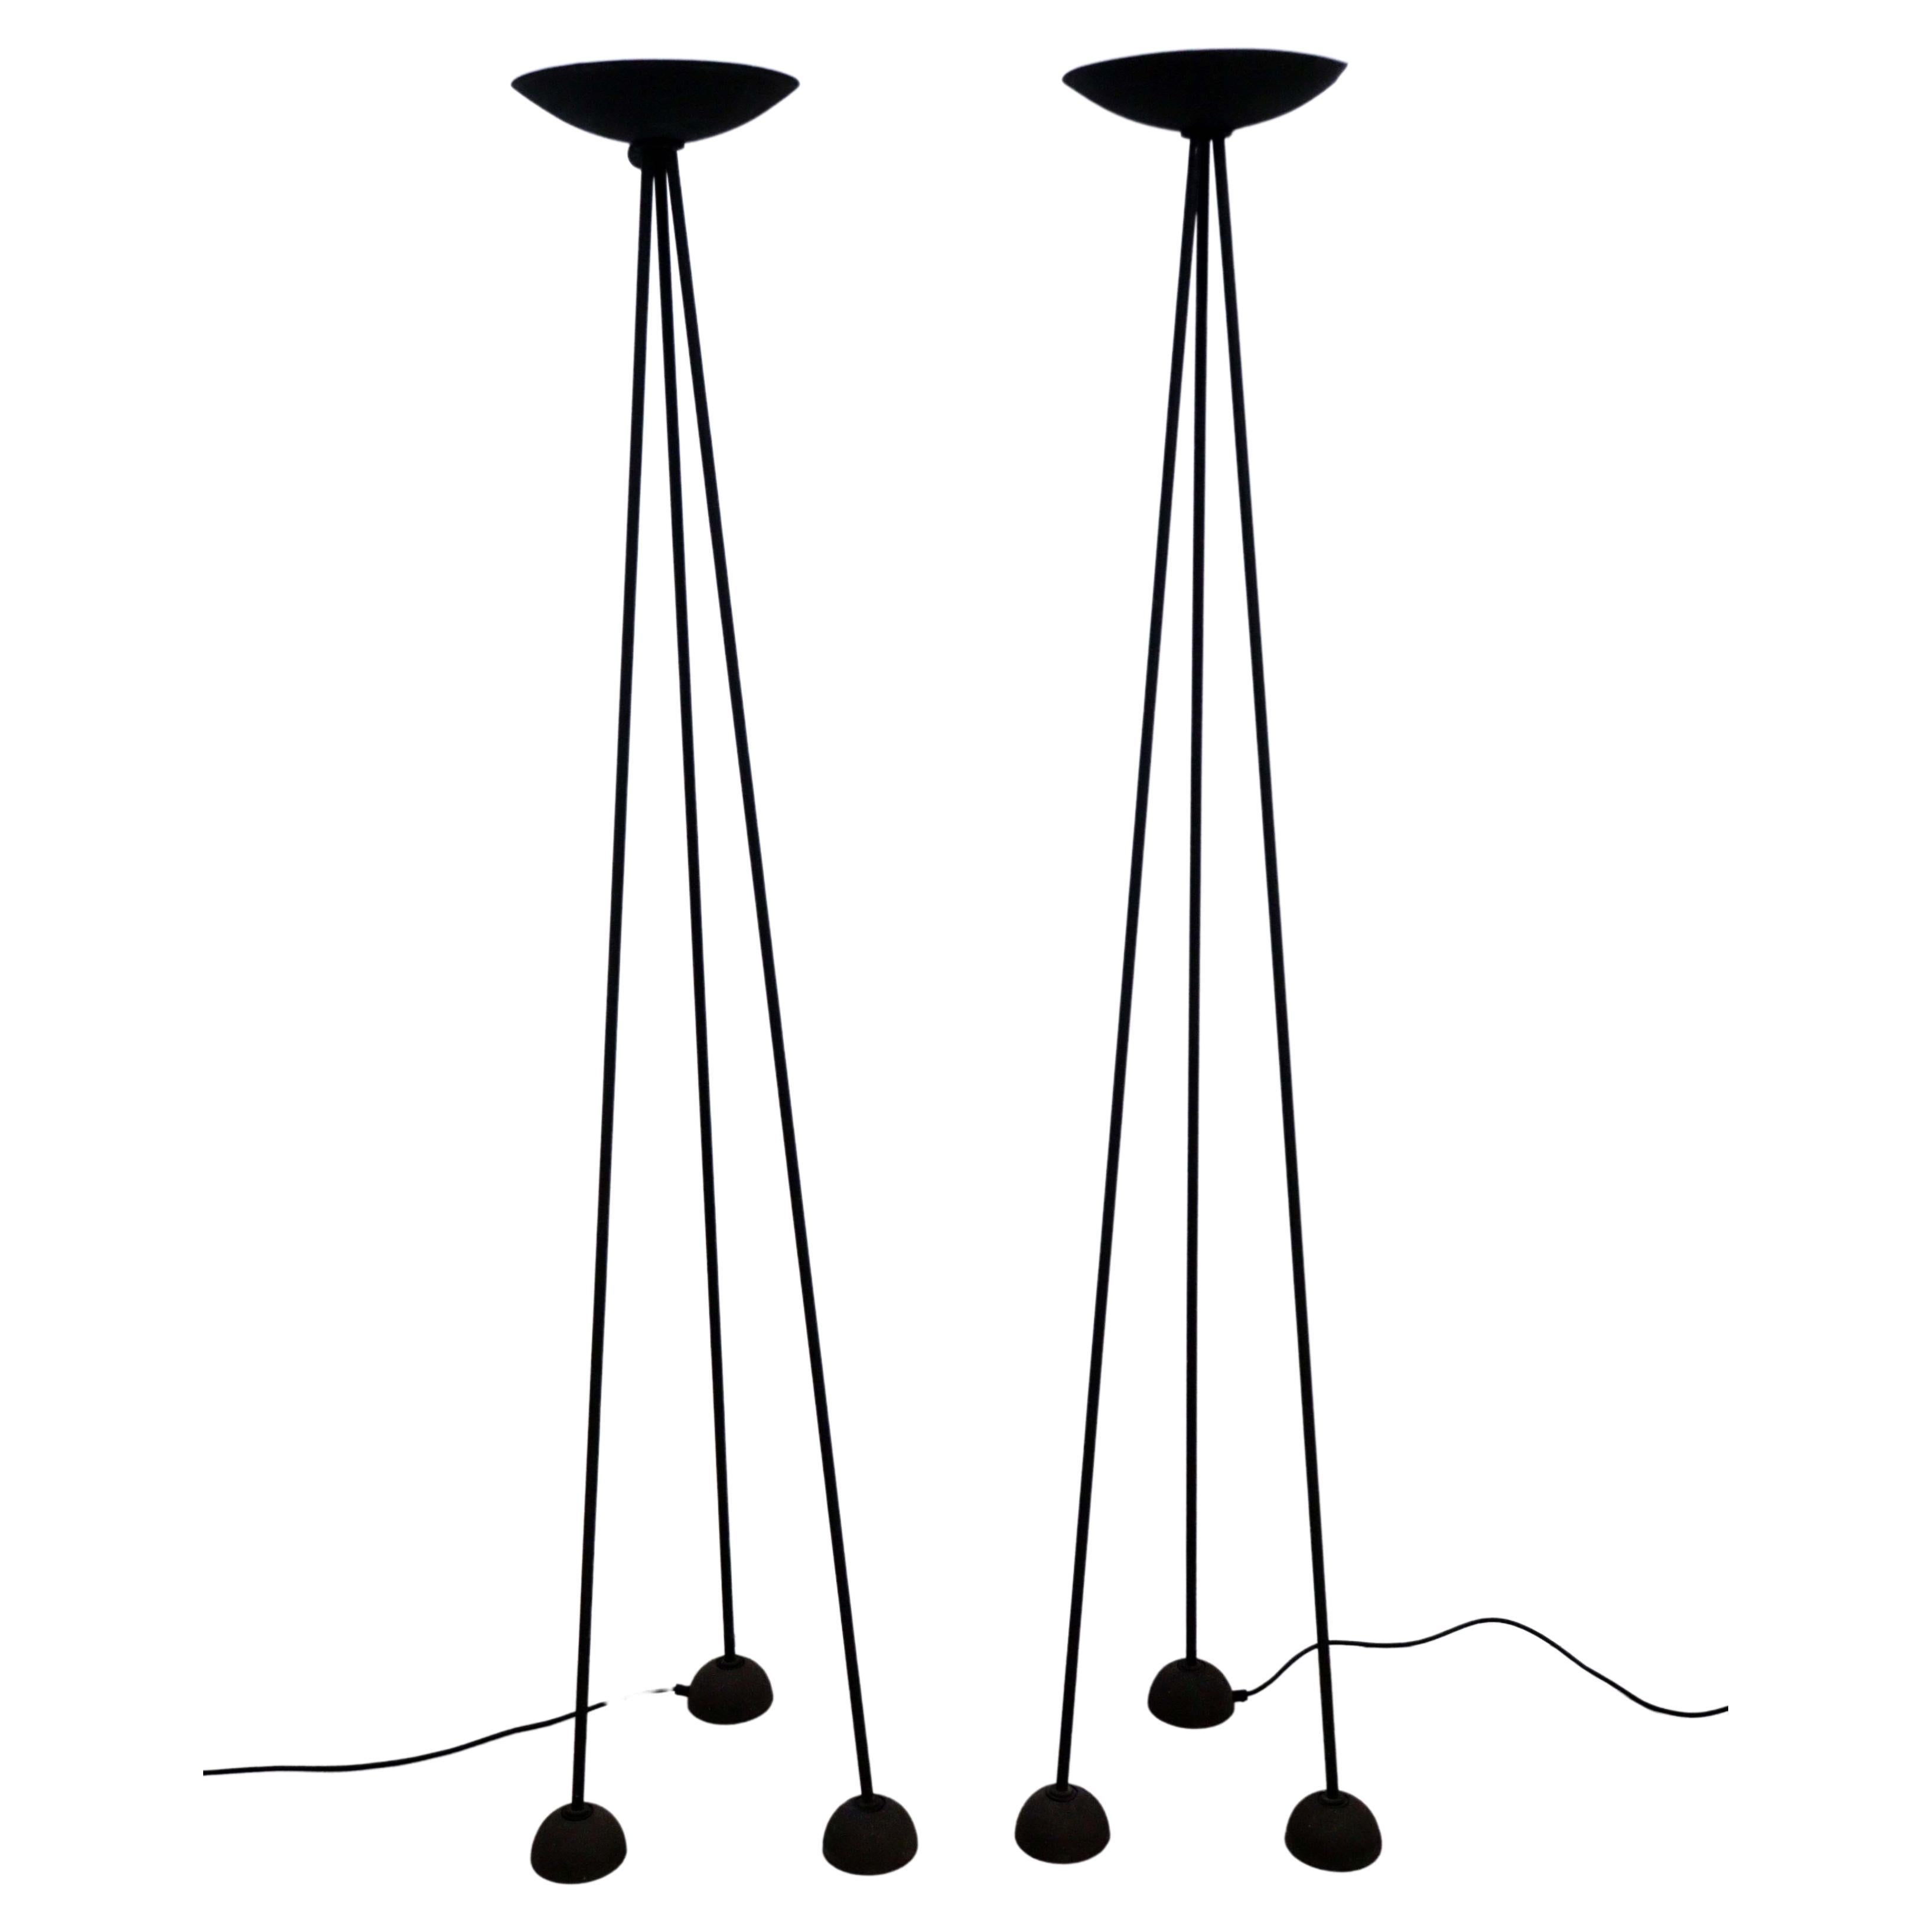 Pair Koch & Lowy Tripod Torchiere Floor Lamps Post Modern Contemporary 1980